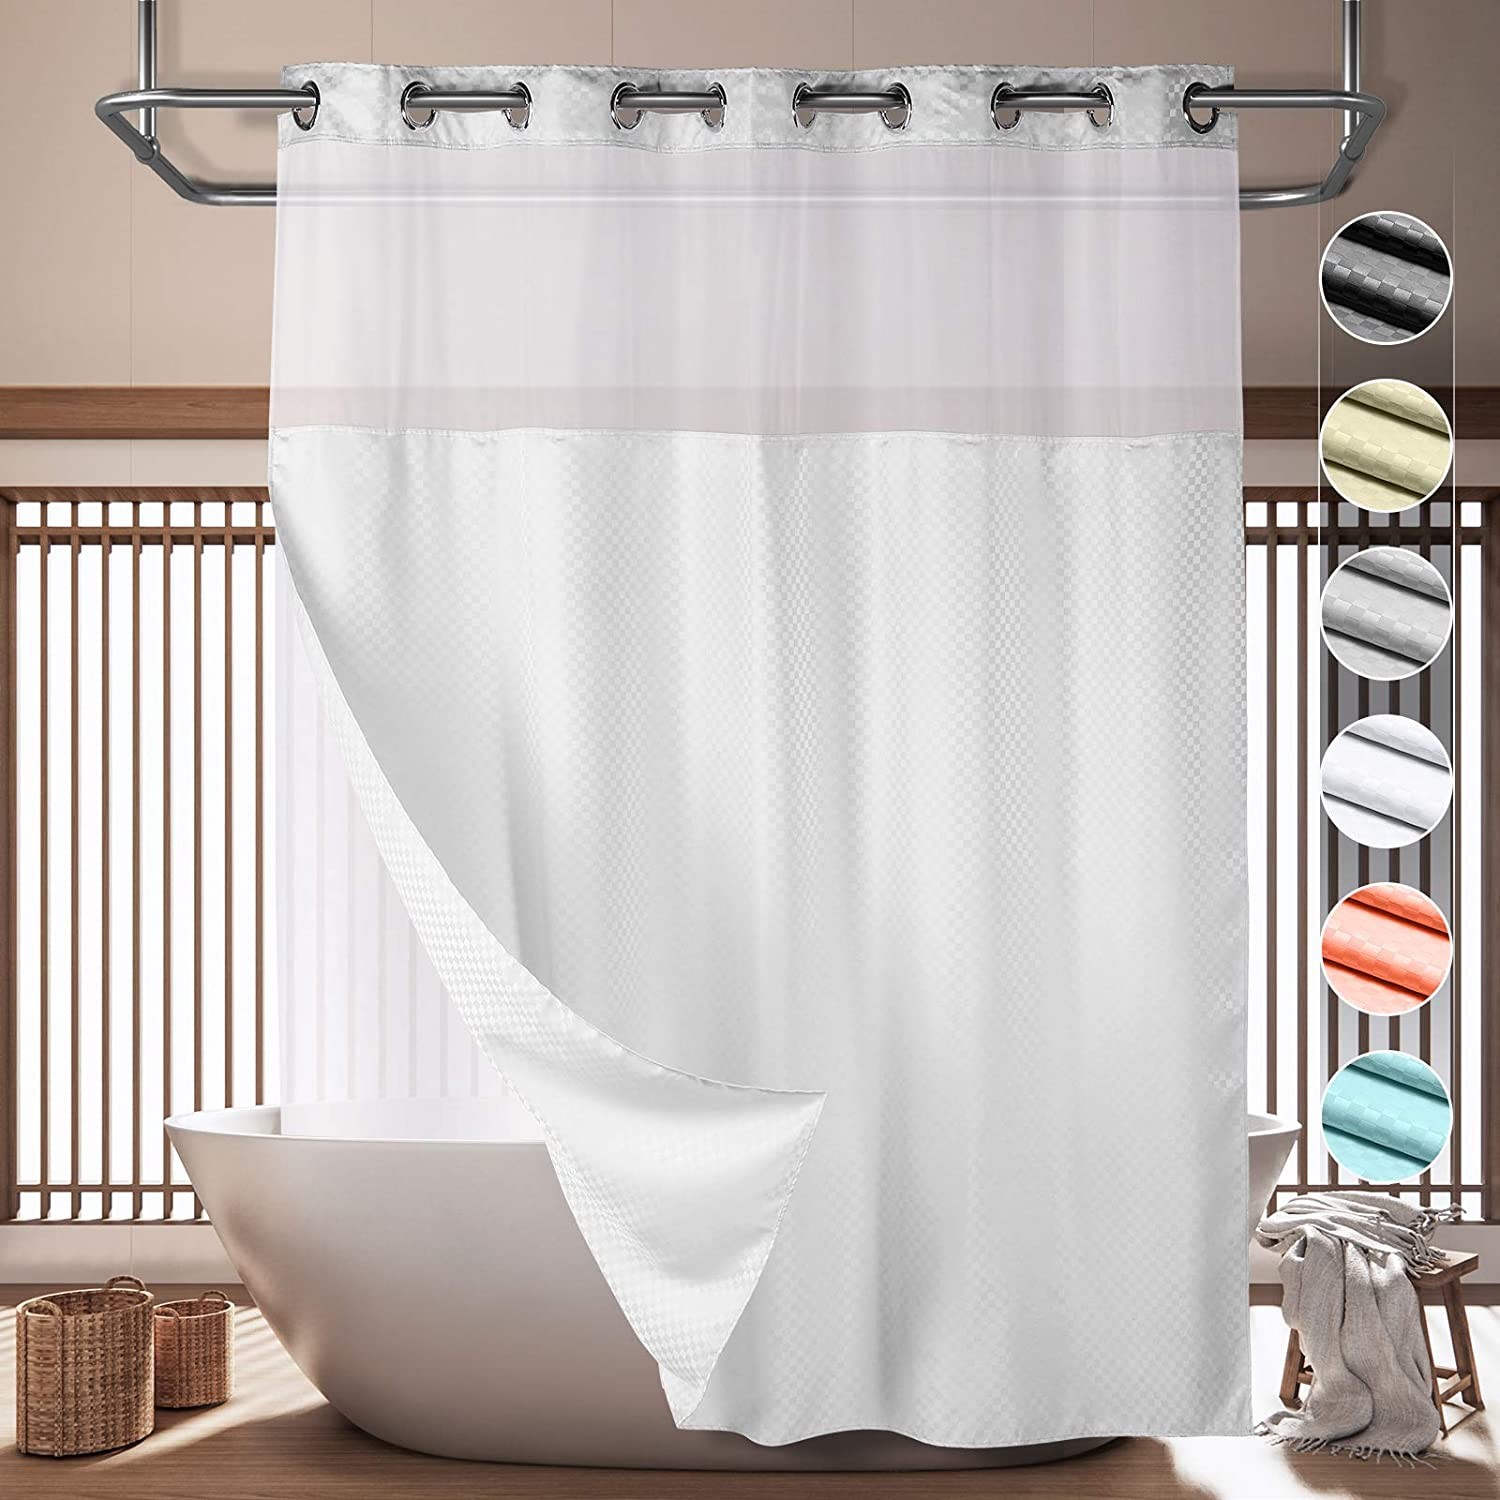 Lagute SnapHook Hook Free Shower Curtain with Snap-in Liner & See Through Top Window - White